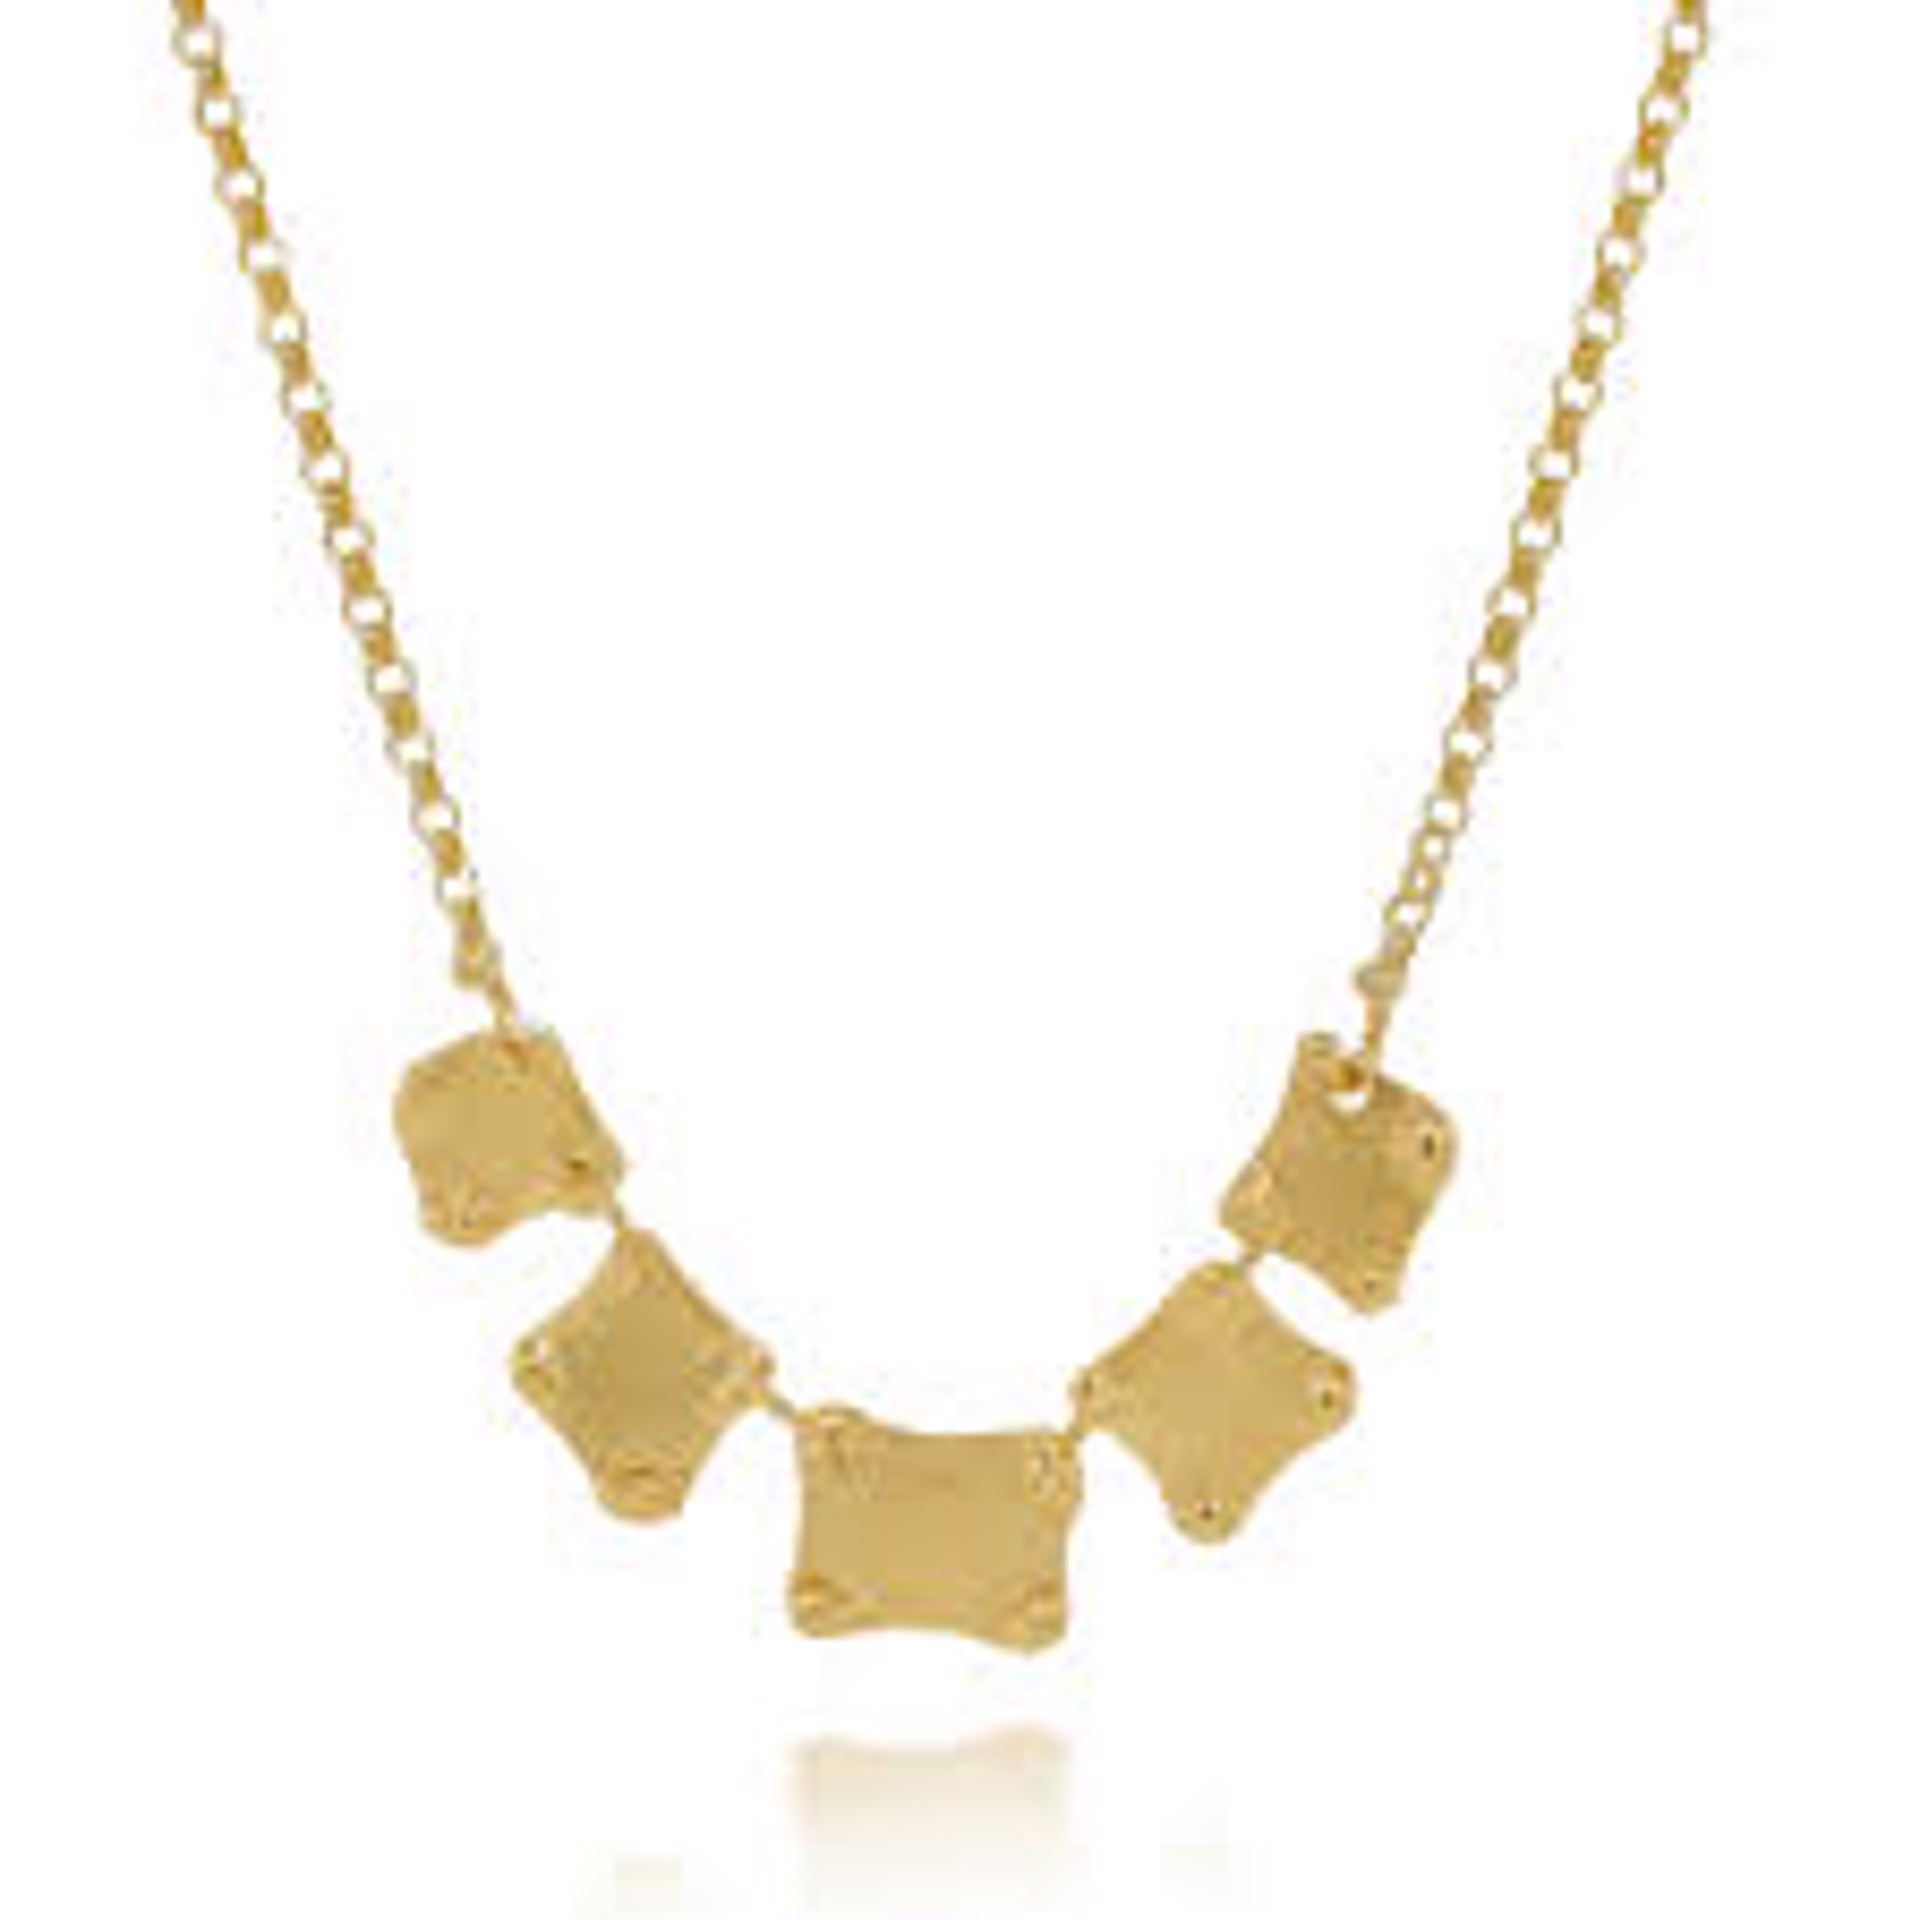 Seashell Speckle Necklace- 14k yellow gold by Kristen Baird